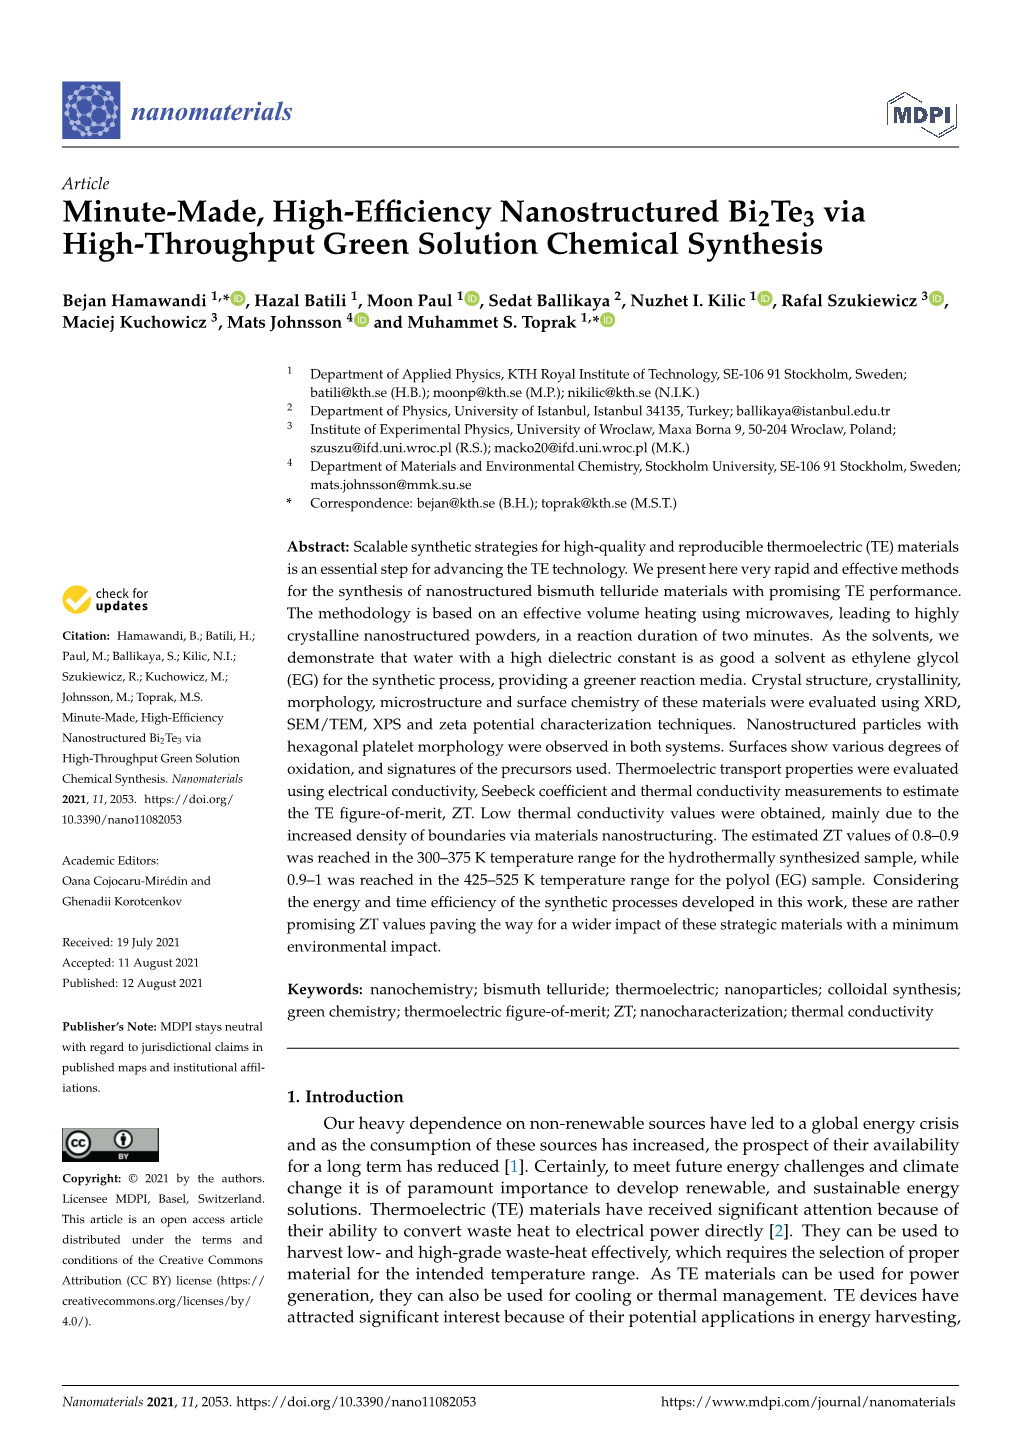 Minute-Made, High-Efficiency Nanostructured Bi2te3 Via High-Throughput Green Solution Chemical Synthesis